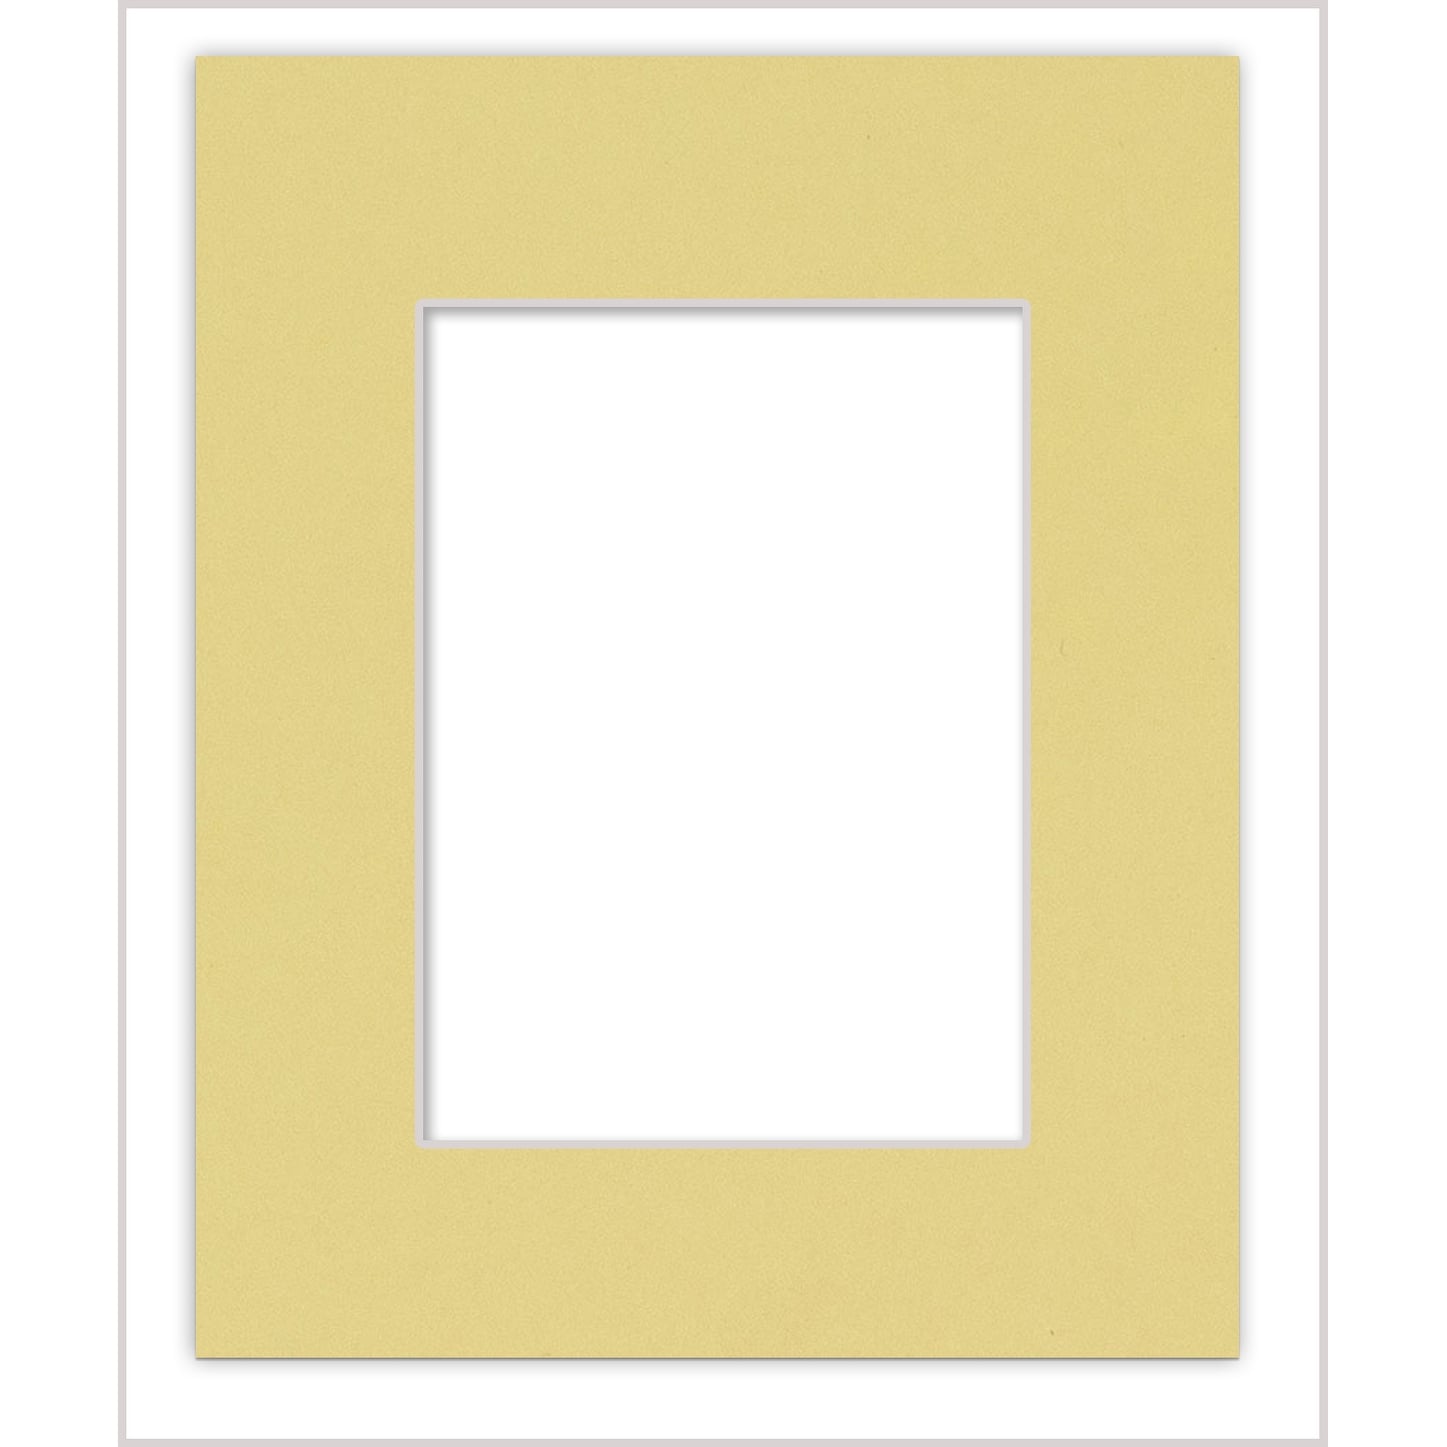 PICTURE FRAMING MATS 11x14 for 10x13 photo White rectangle opening